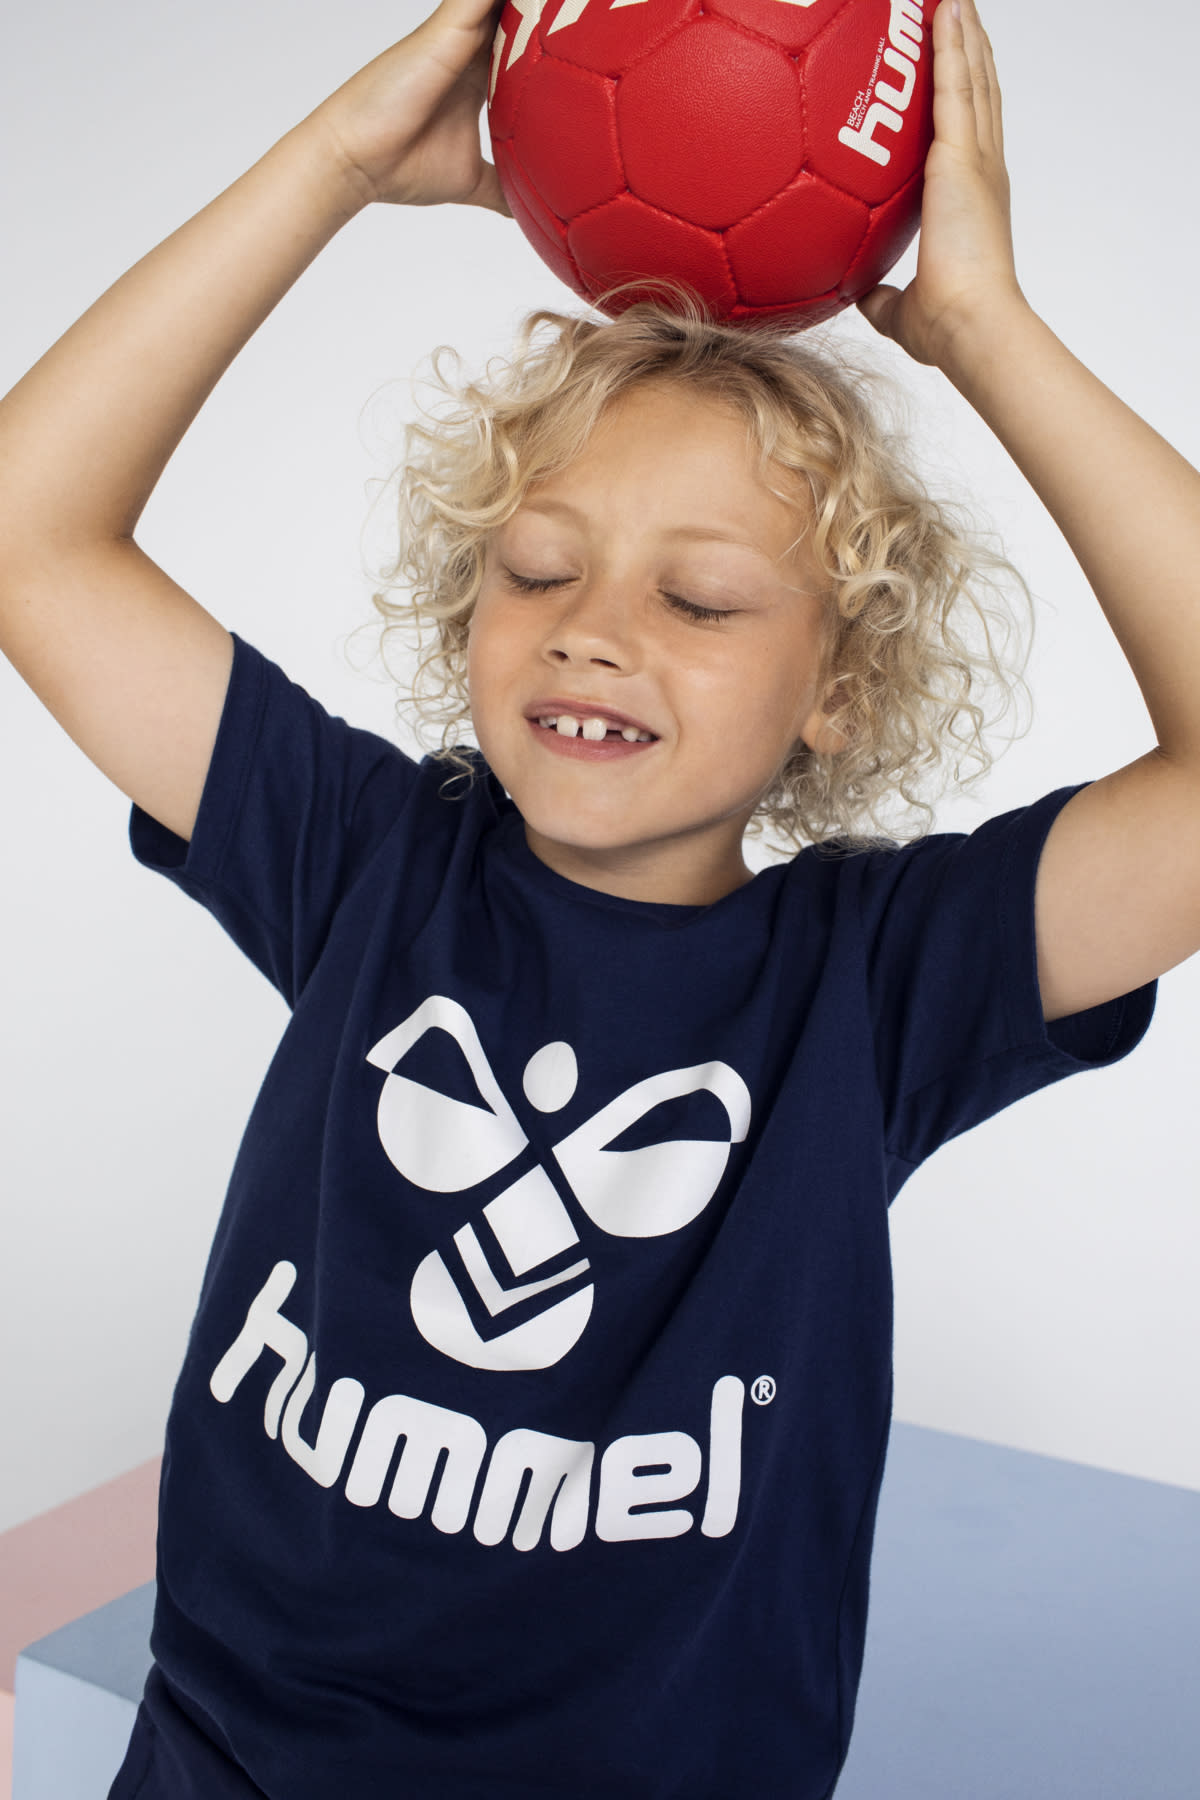 Kids' hmlTRES T-Shirt Short Sleeve Cherry Tomato | Buy Kids' hmlTRES T-Shirt  Short Sleeve Cherry Tomato here | Outnorth